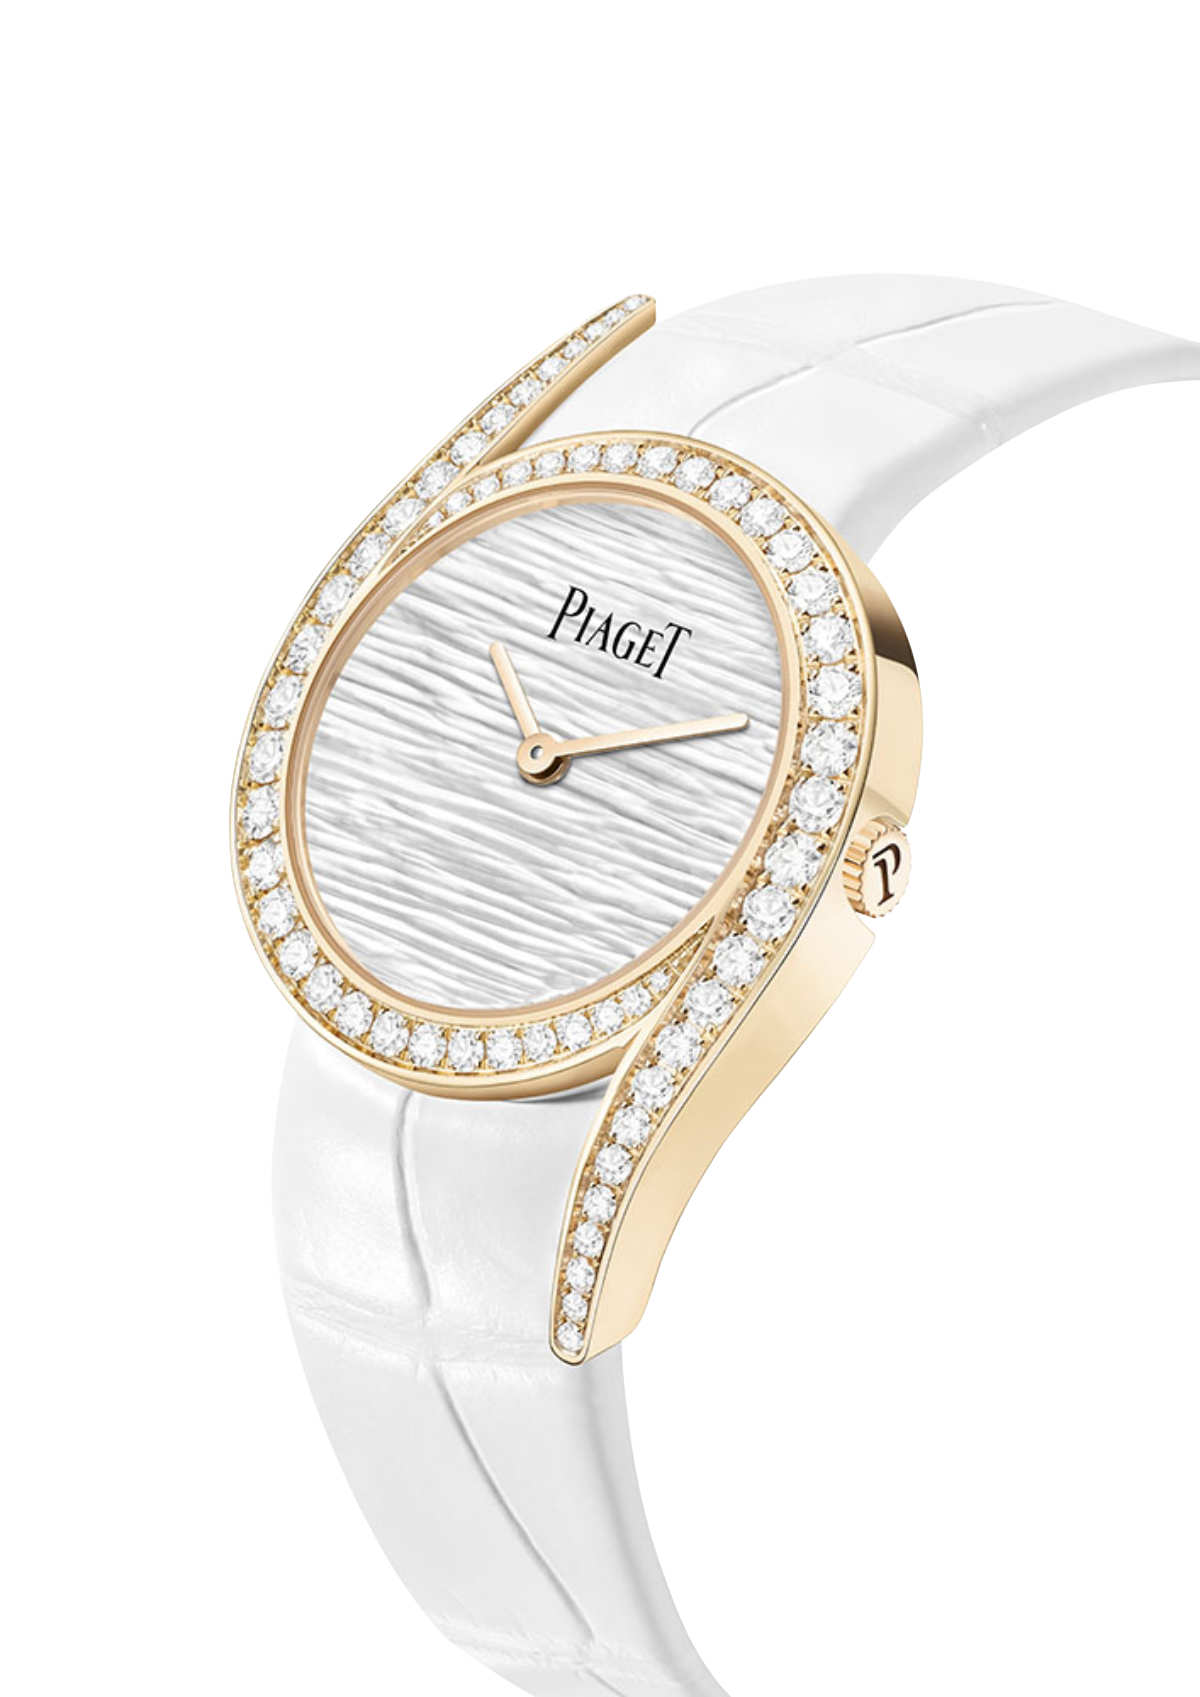 Piaget's Tribute To The Limelight Gala And Its Illustrious History With Two New Limited Editions